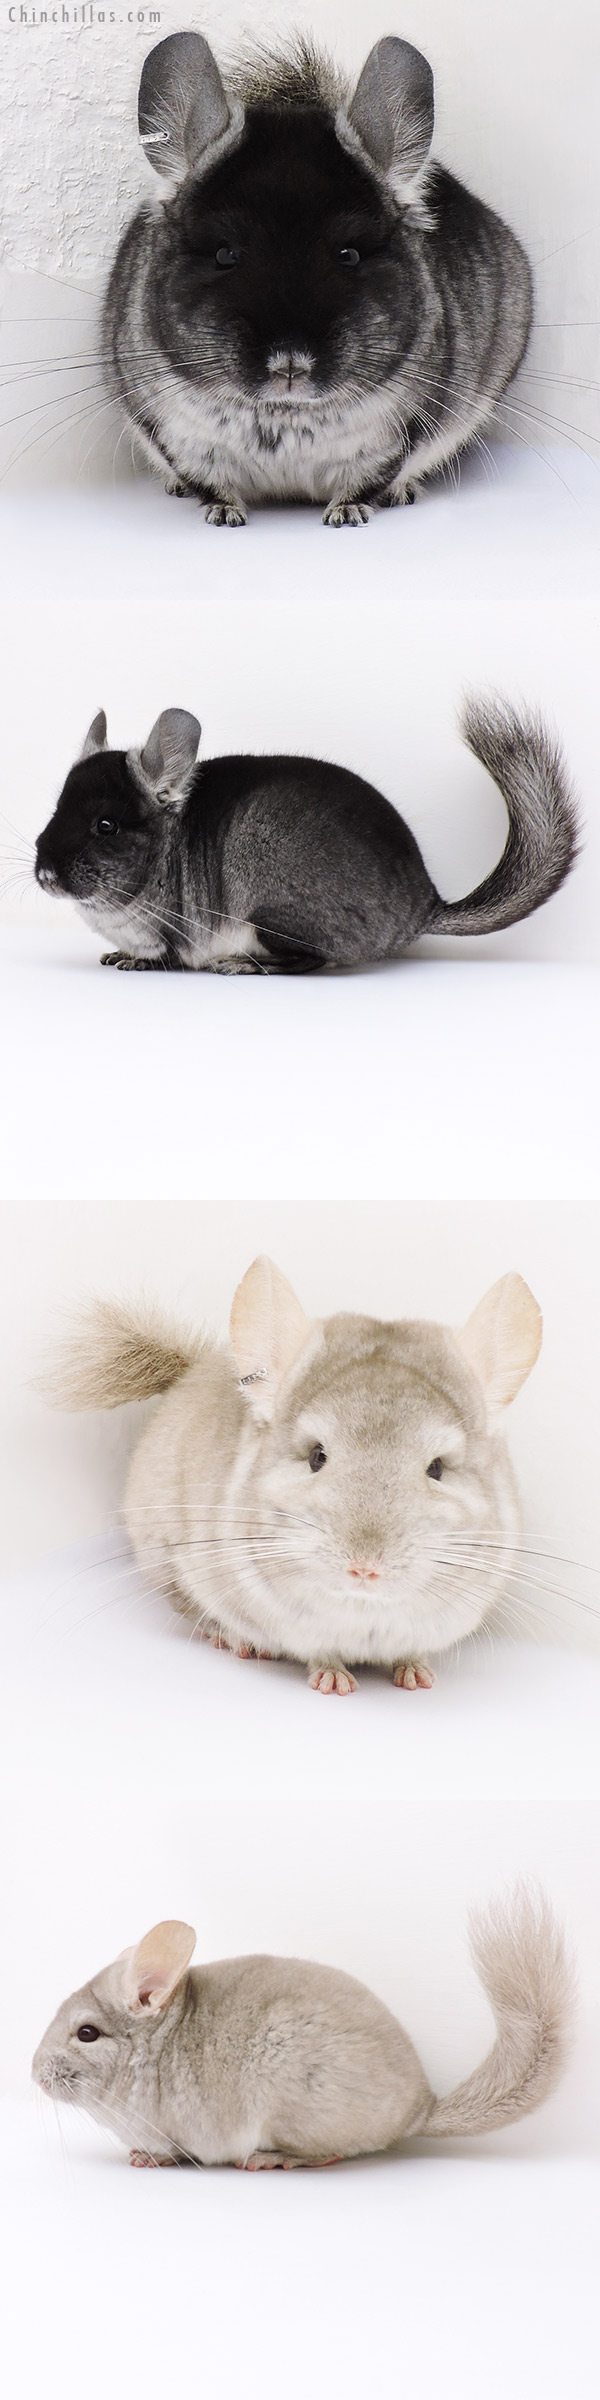 Chinchilla or related item offered for sale or export on Chinchillas.com - 16354 & 16367 Black Velvet & Beige (  Royal Persian Angora Carrier ) Pair